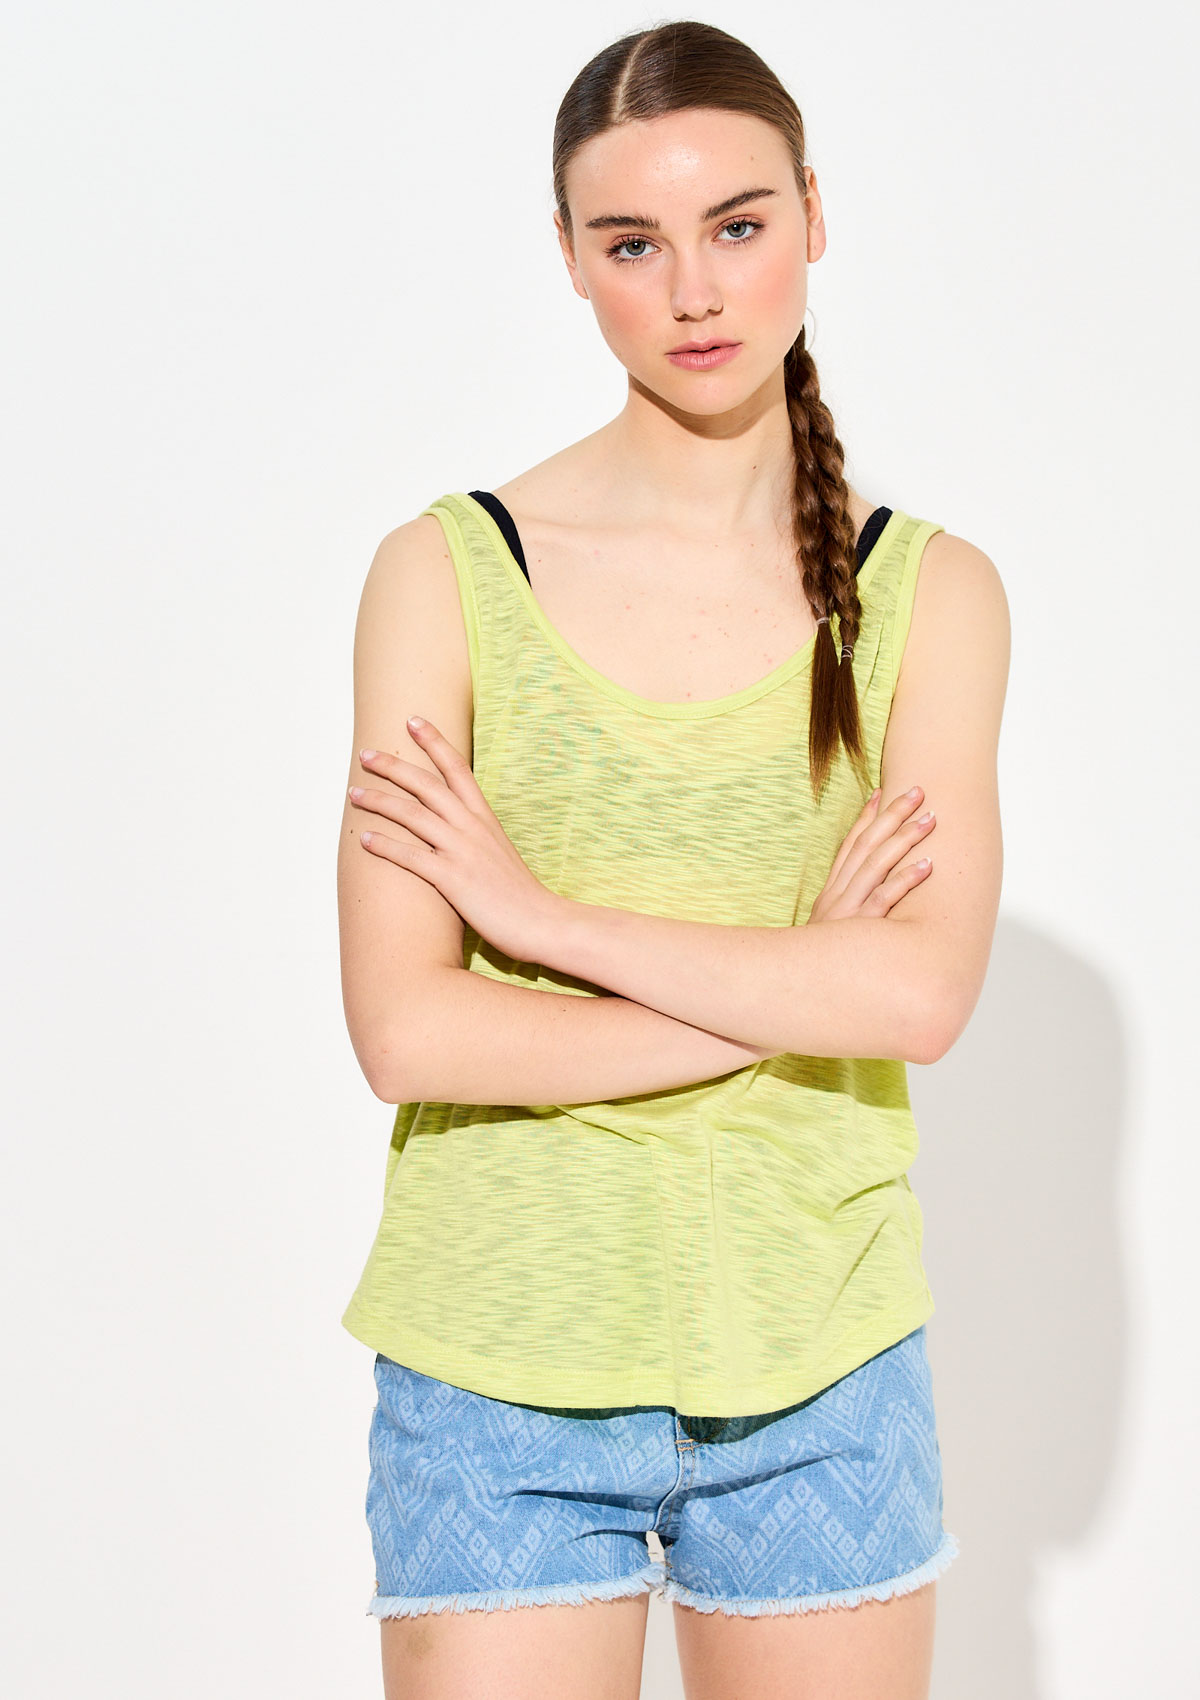 MUSCULOSA FLAME